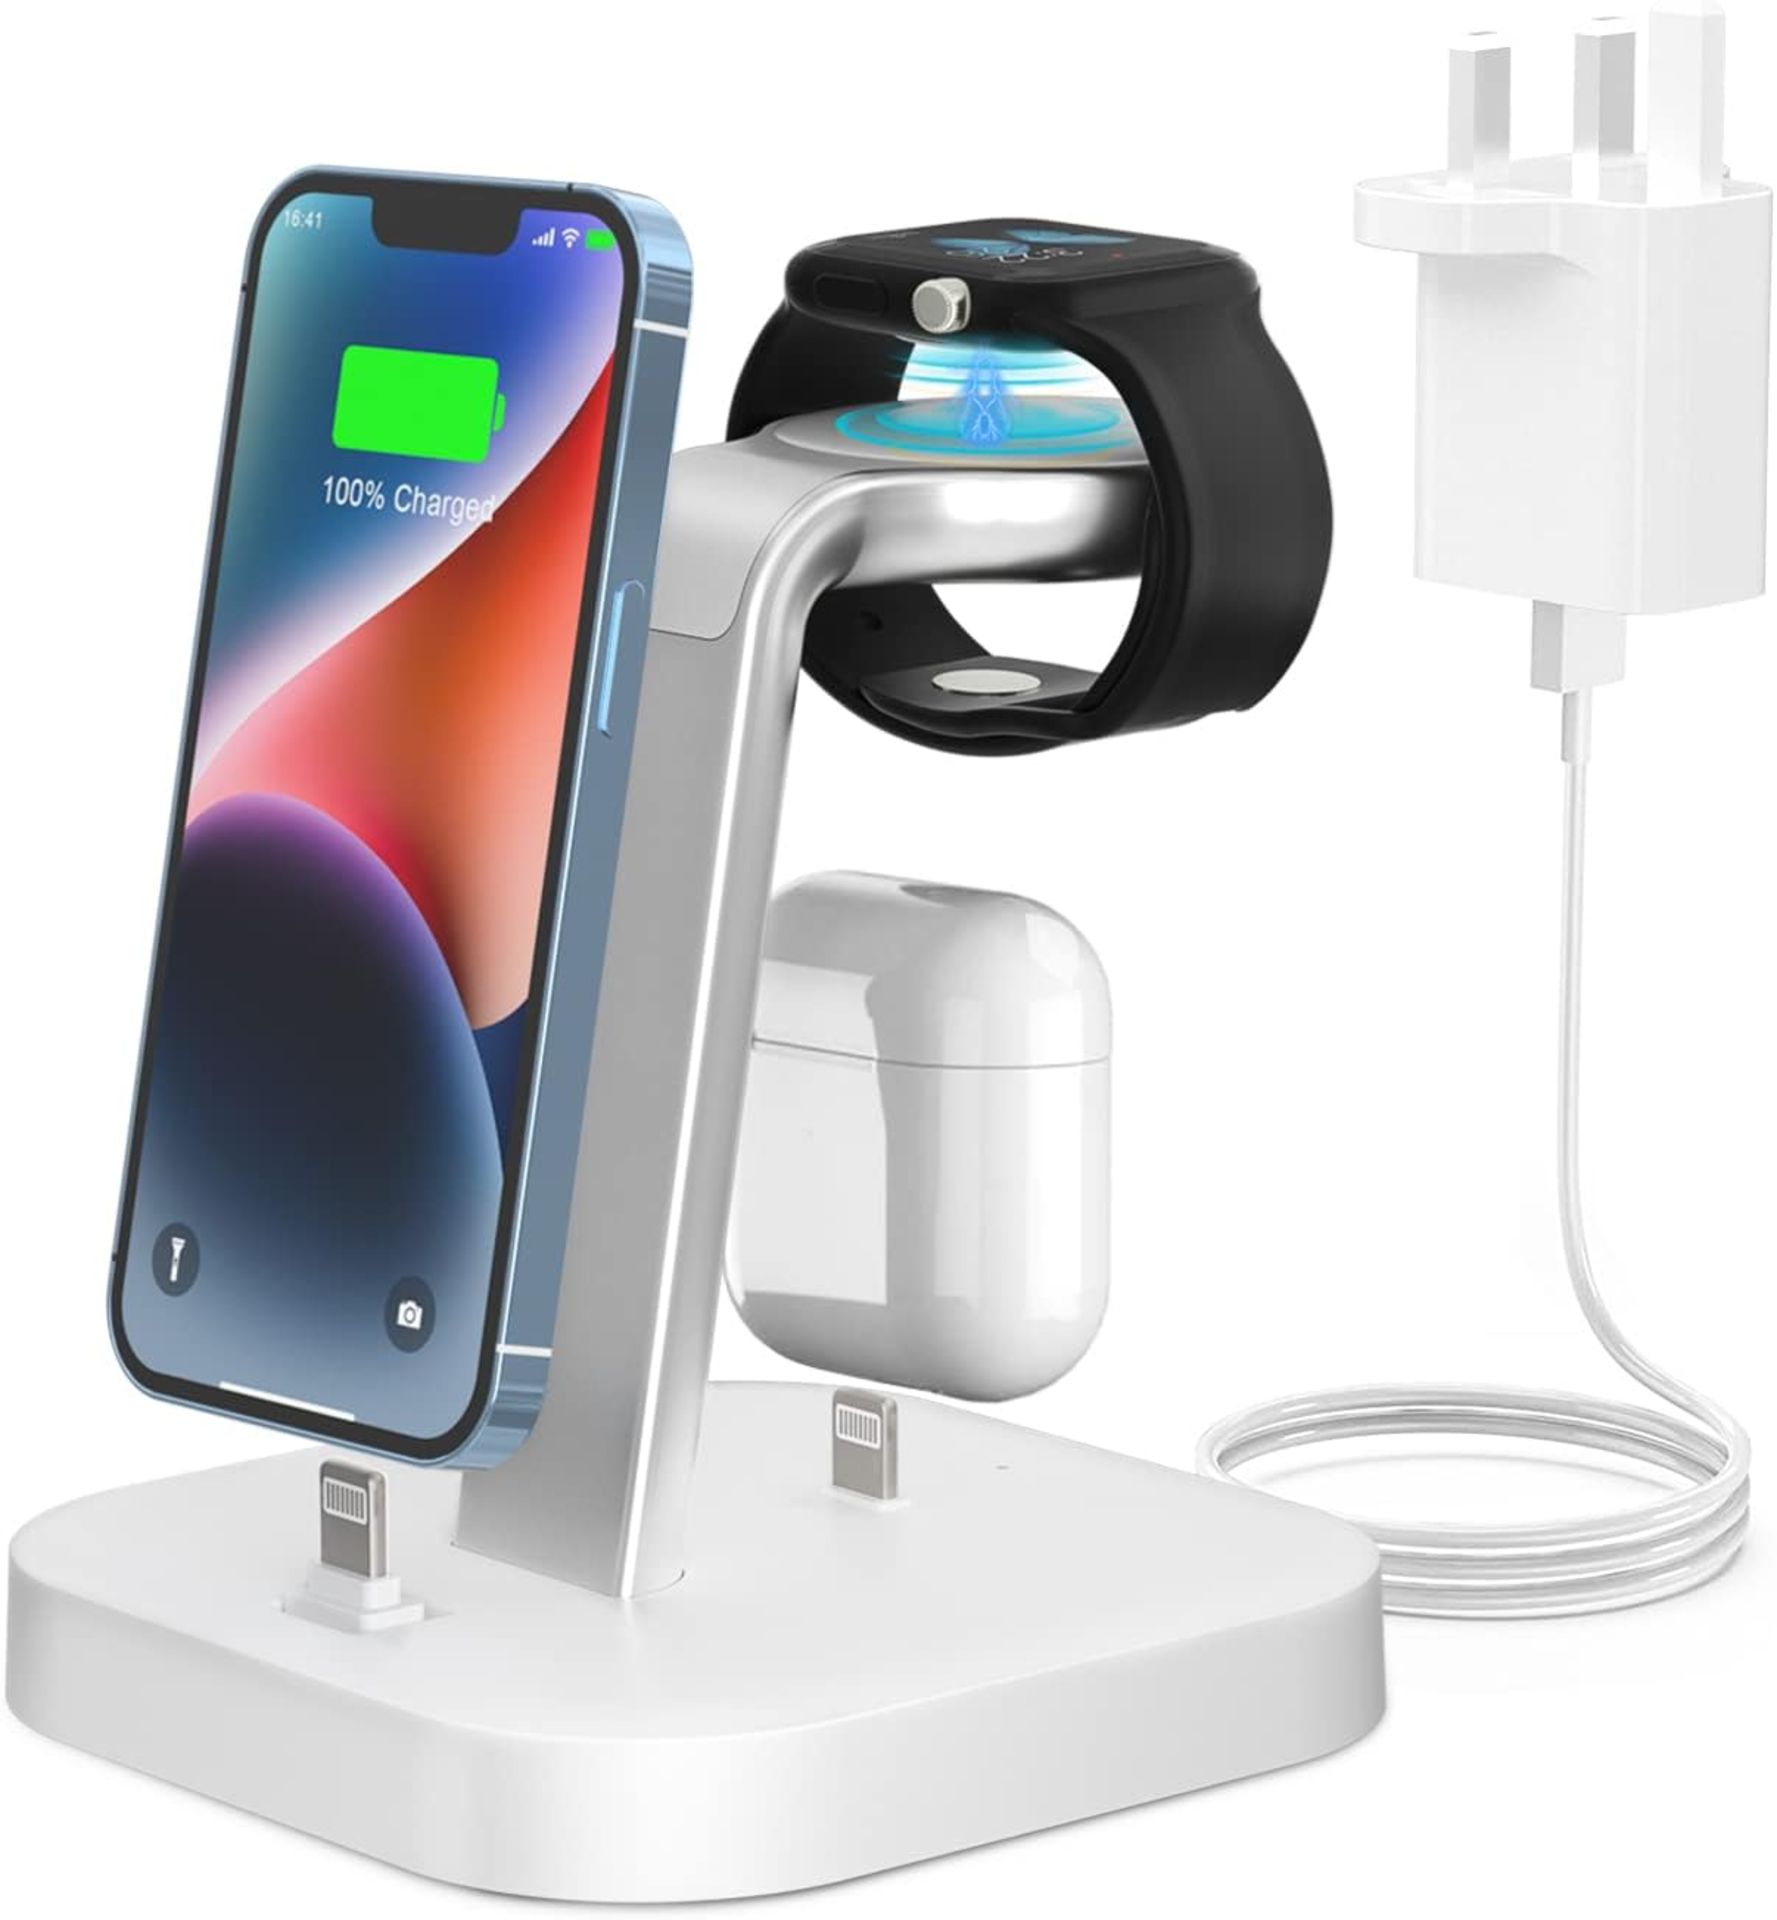 RRP £29.99 Charging Station for Multiple Devices - ADADPU 3 in 1 Wireless Charger Stand for Apple